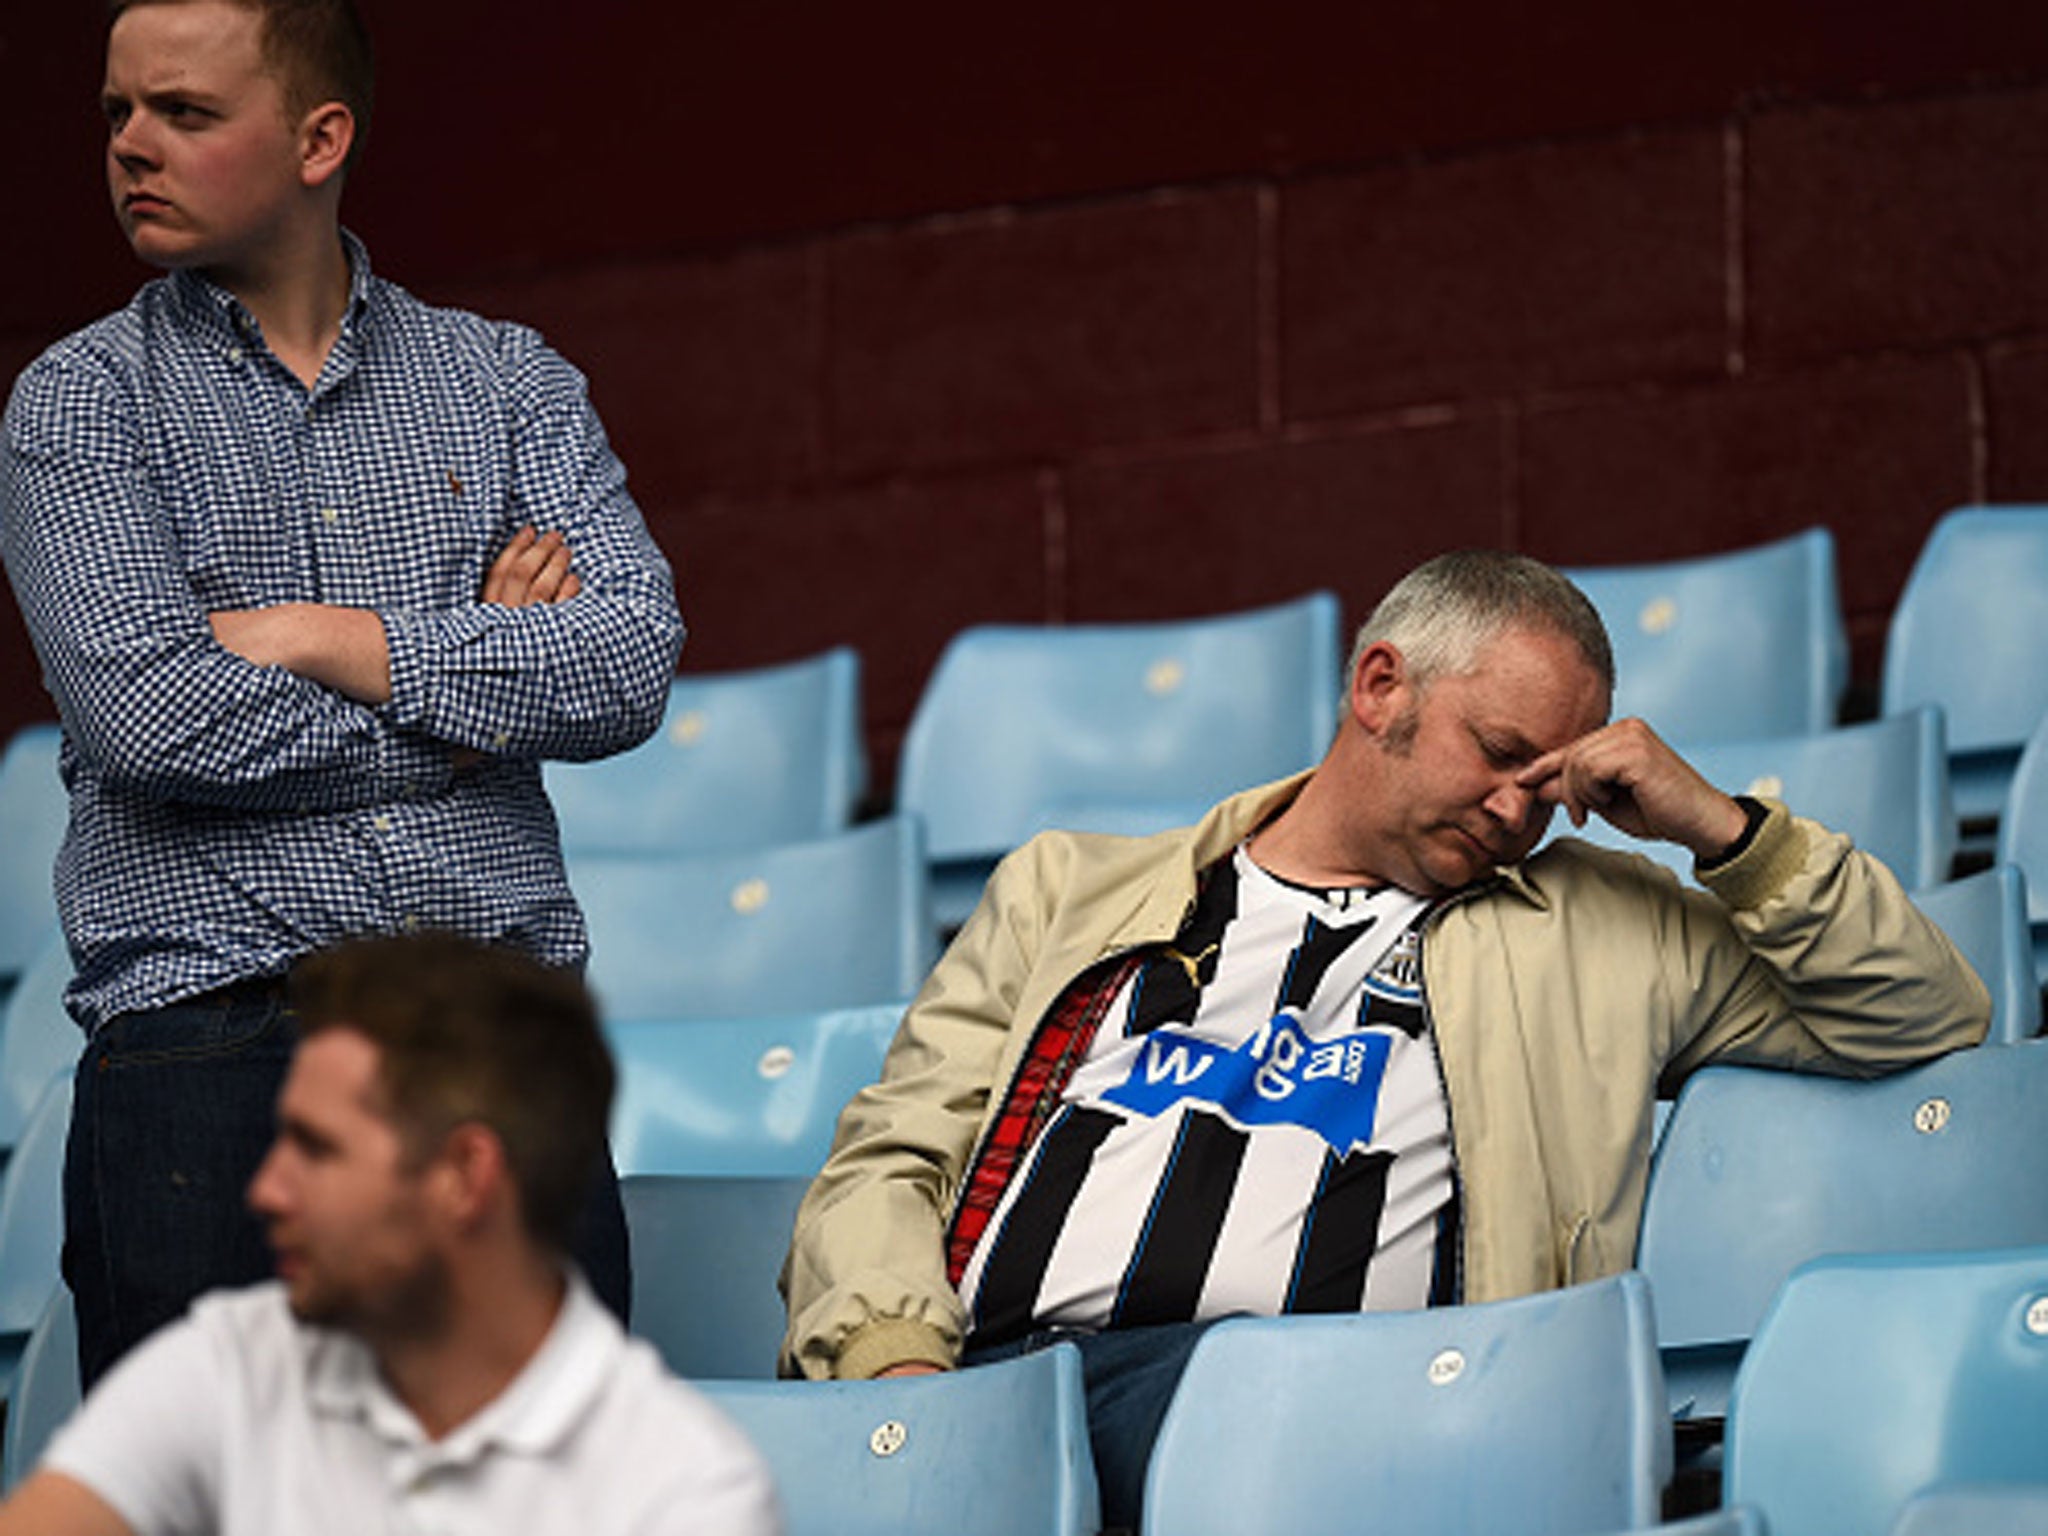 Newcastle were relegated without kicking a ball on Wednesday, leaving managing director Lee Charnley to apologise to supporters (Getty)